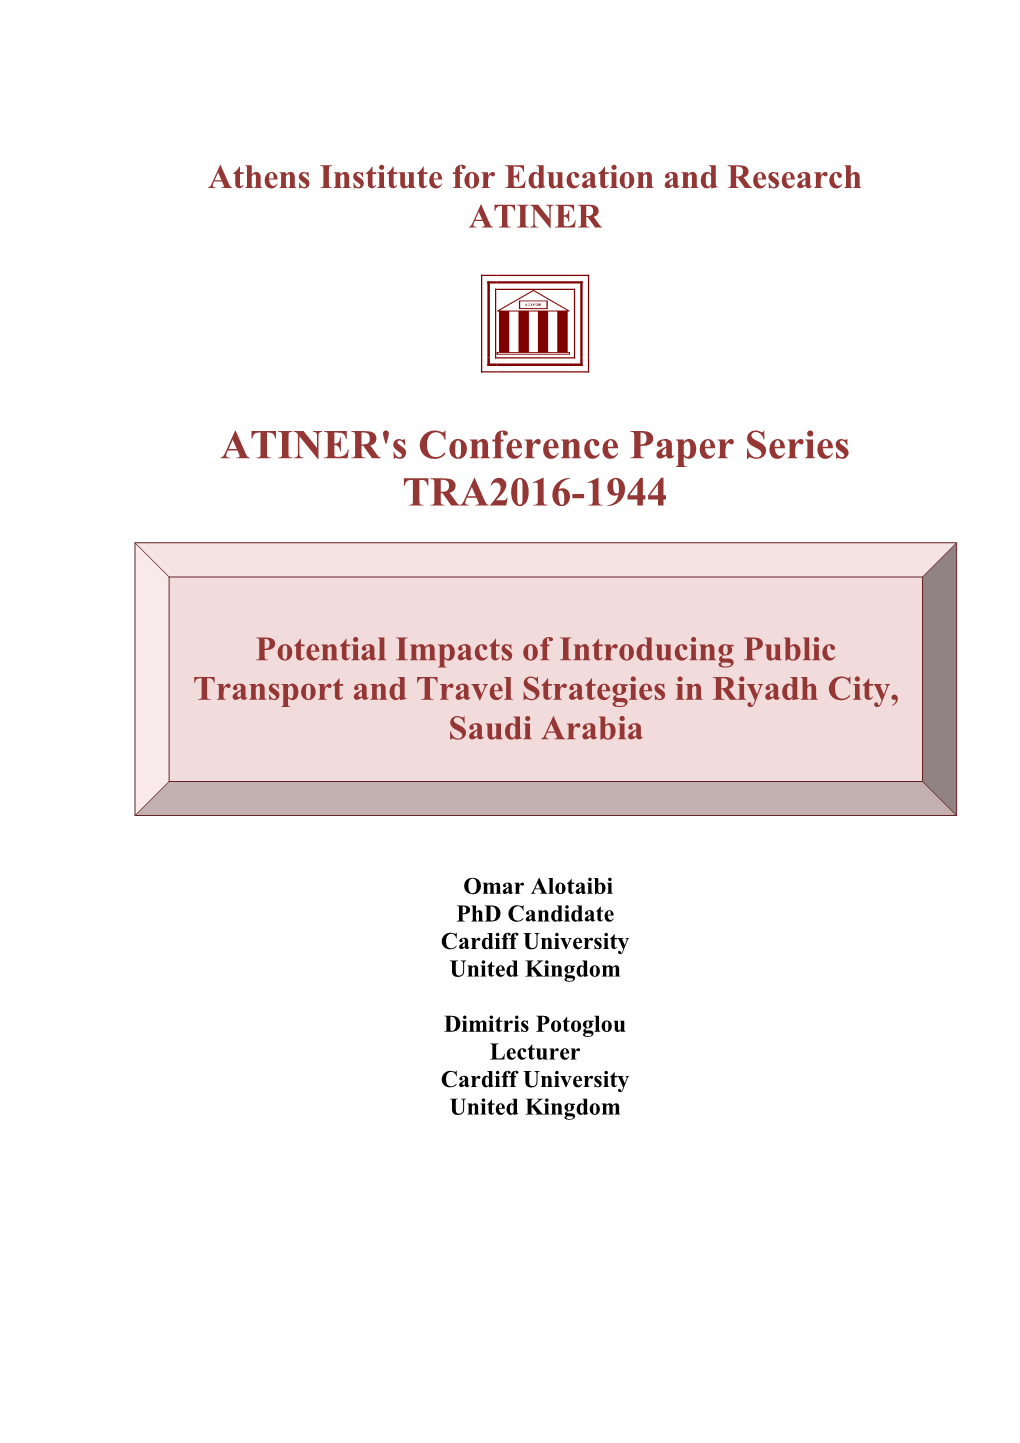 ATINER's Conference Paper Series TRA2016-1944